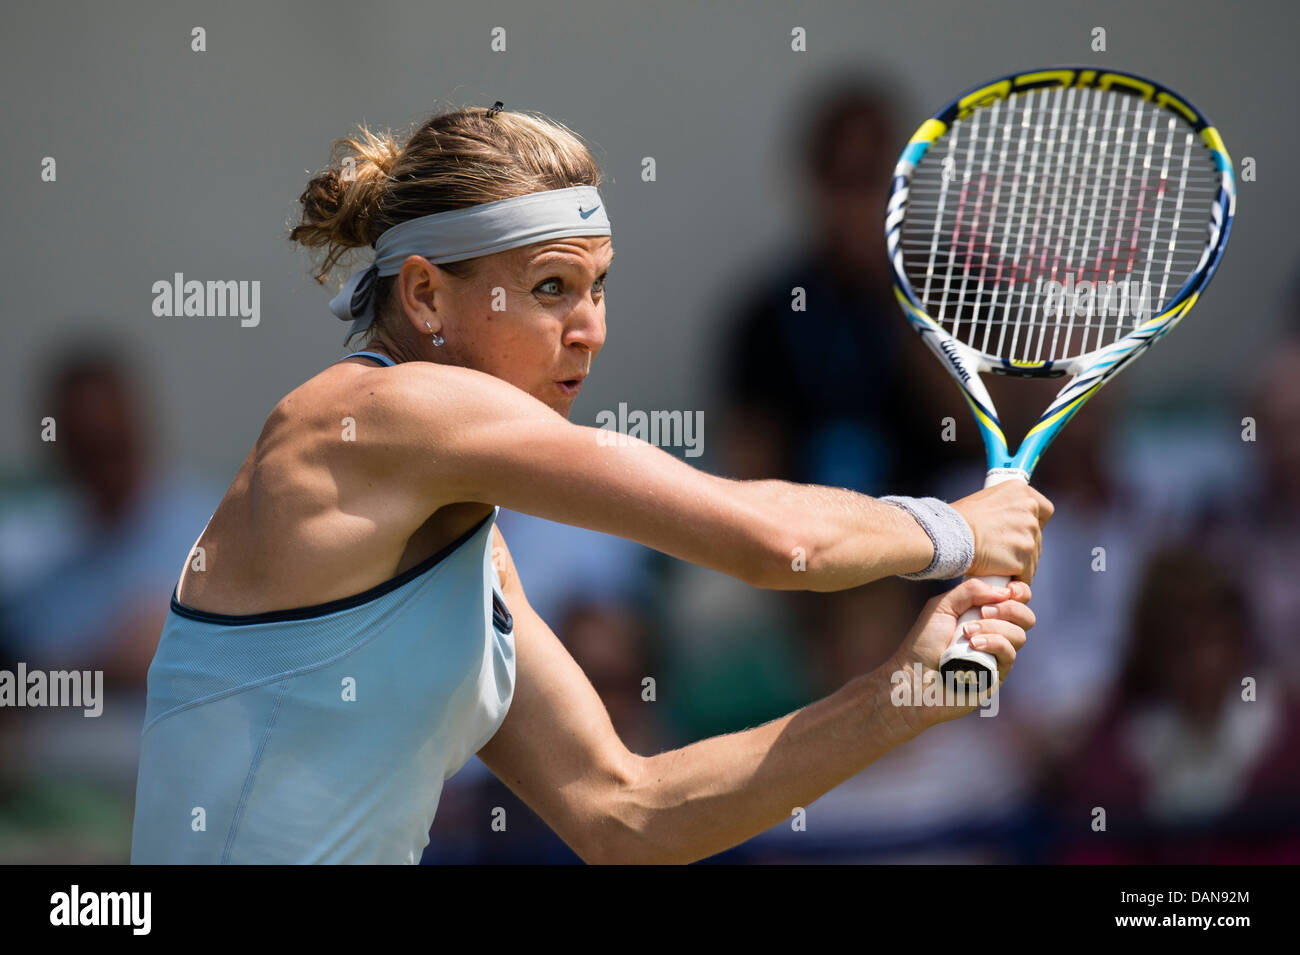 Lucie Safarova of Czech Republic in action playing two handed forehand shot Stock Photo